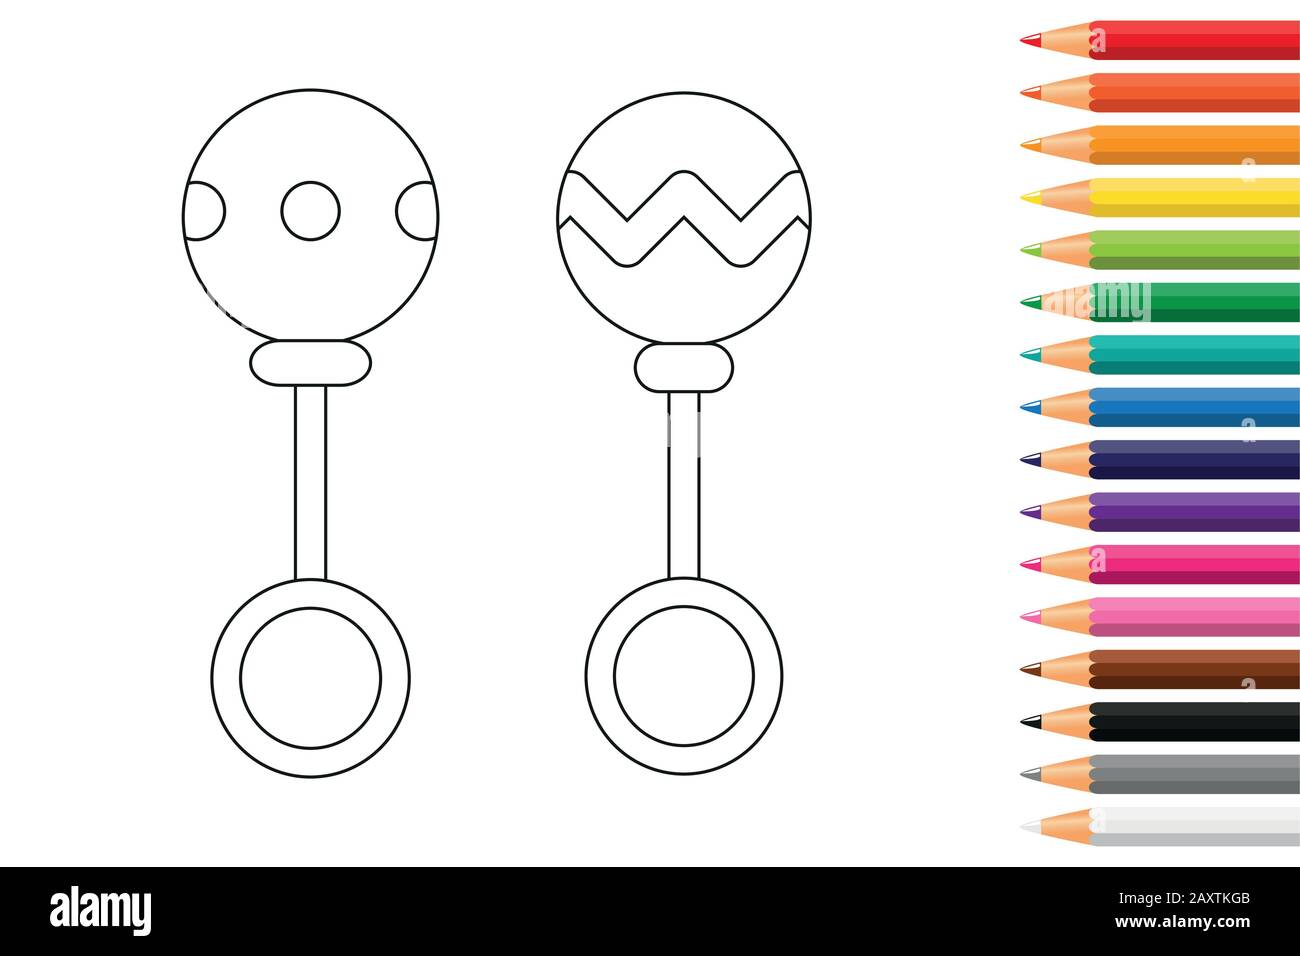 baby rattle for coloring book with pencils vector illustration EPS10 Stock Vector